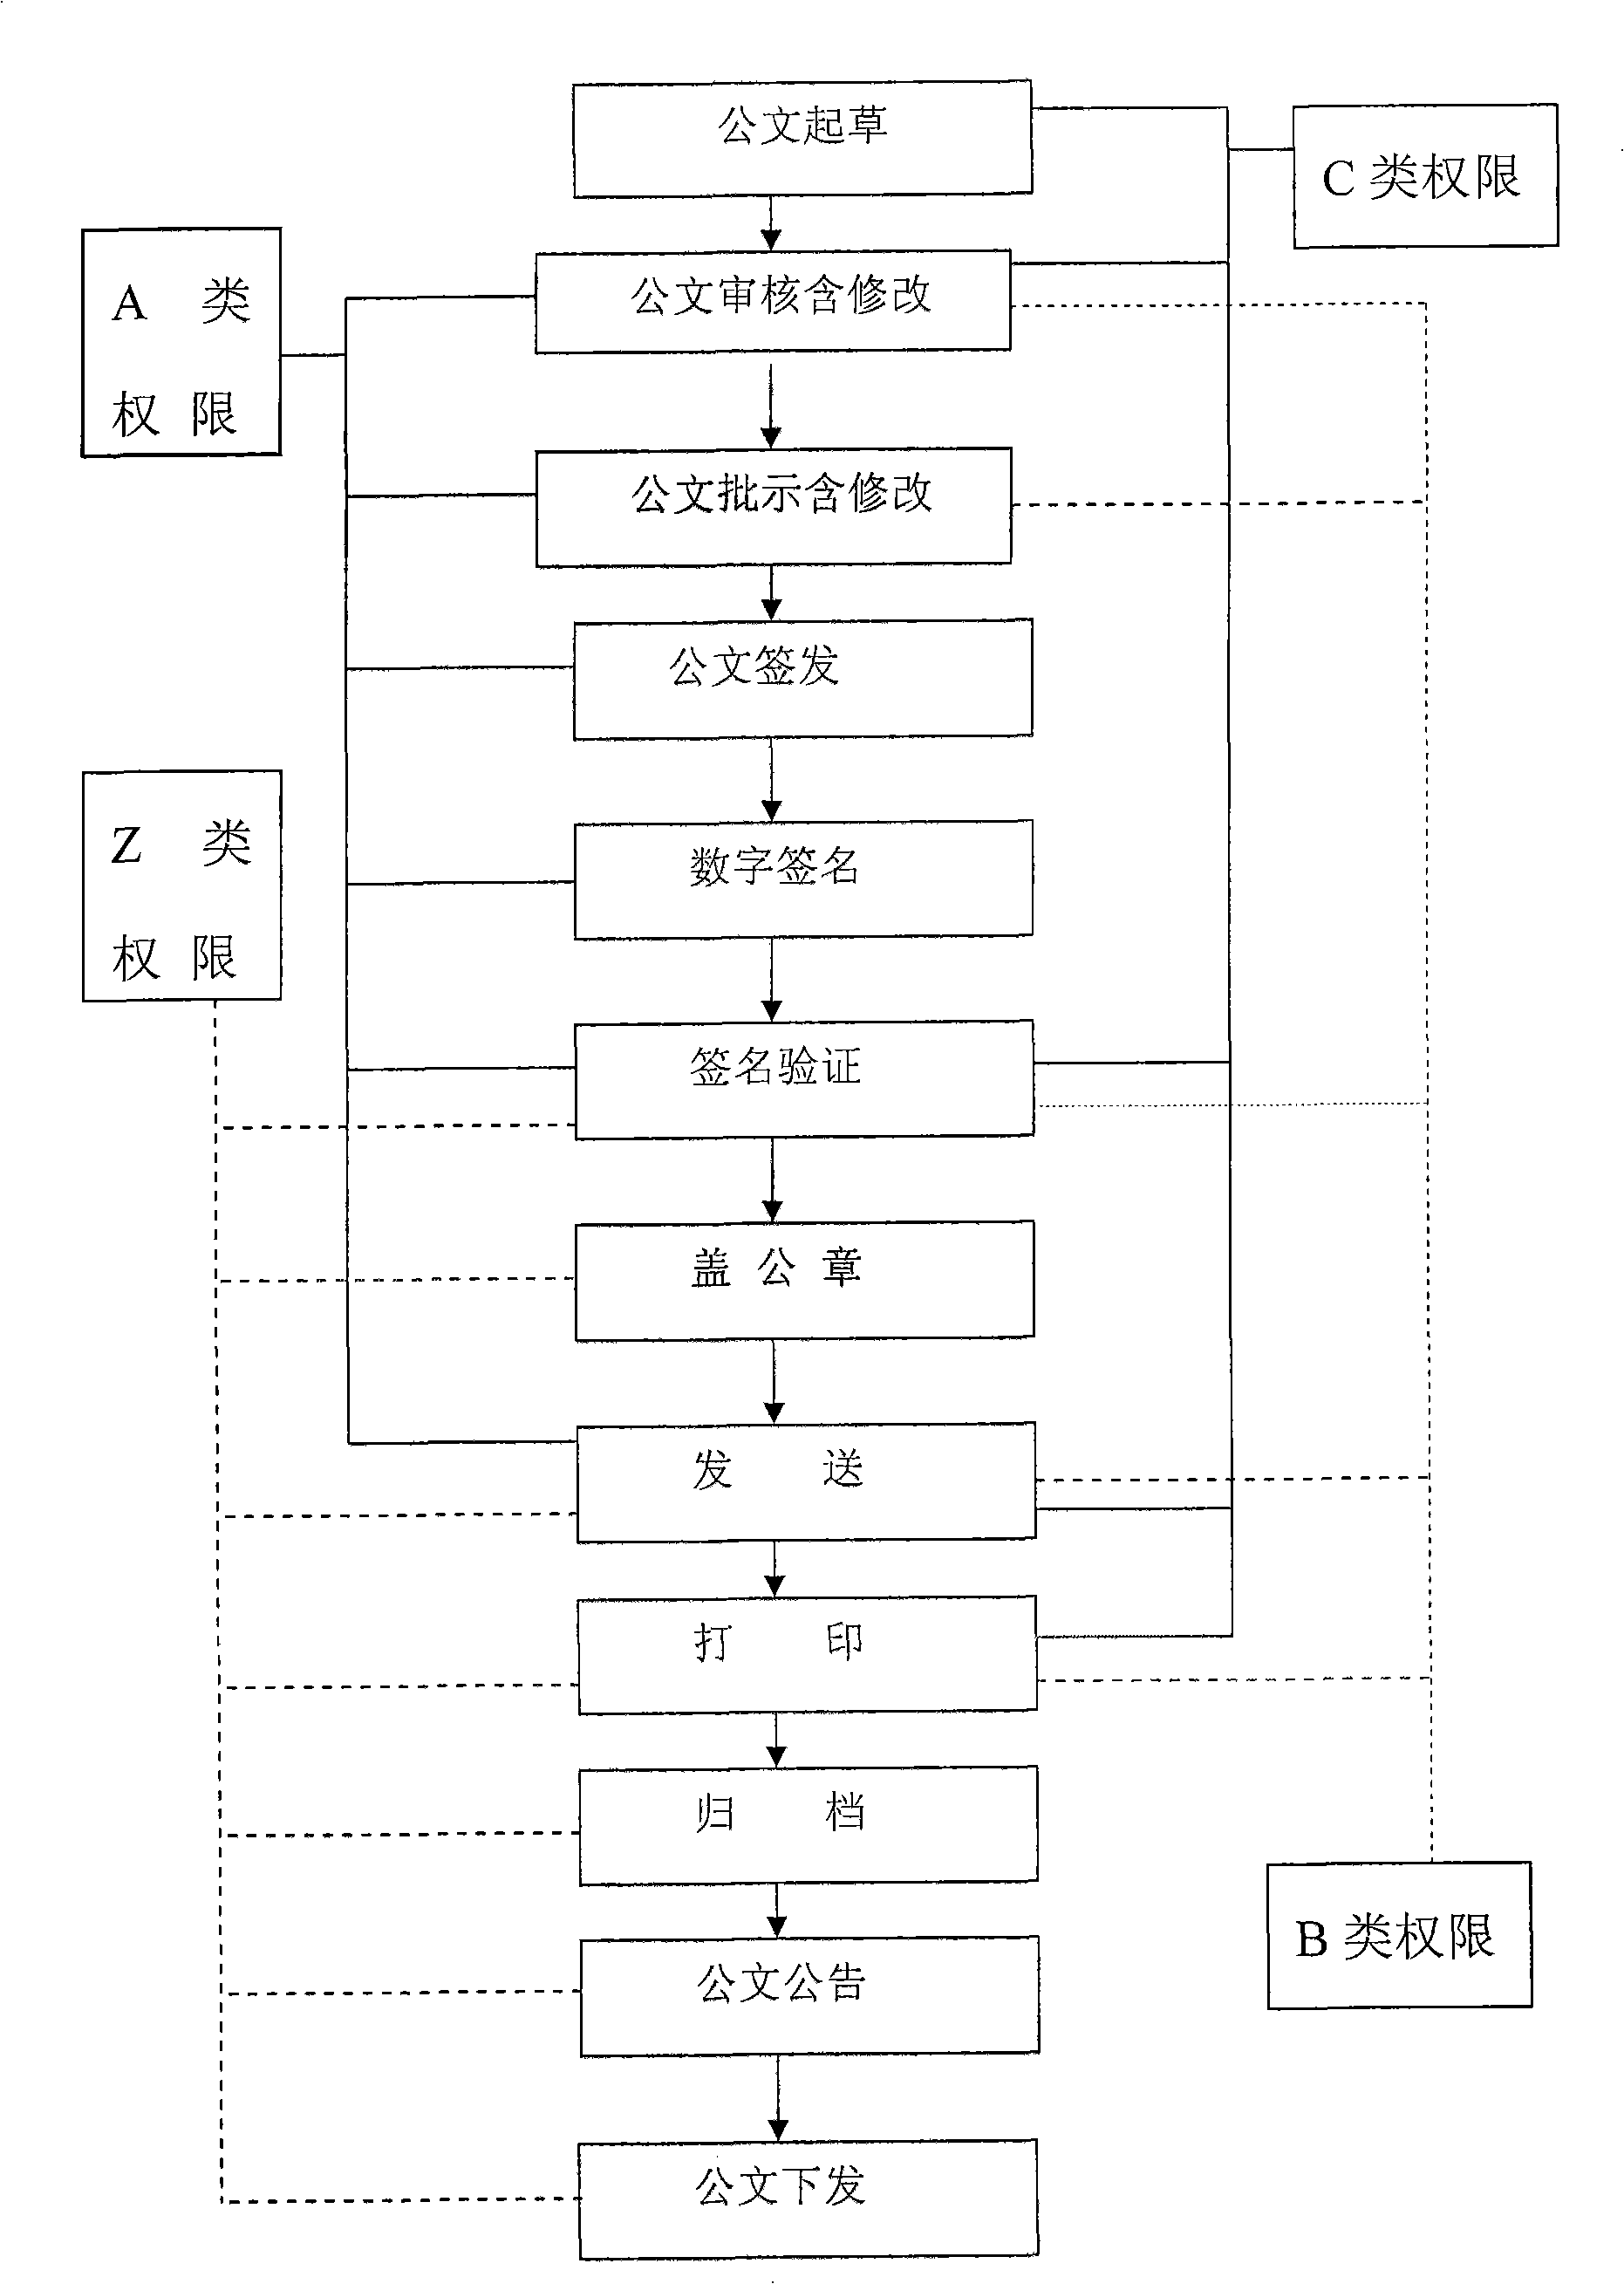 Method for implementing dynamic flow path used for office automation official document circulation